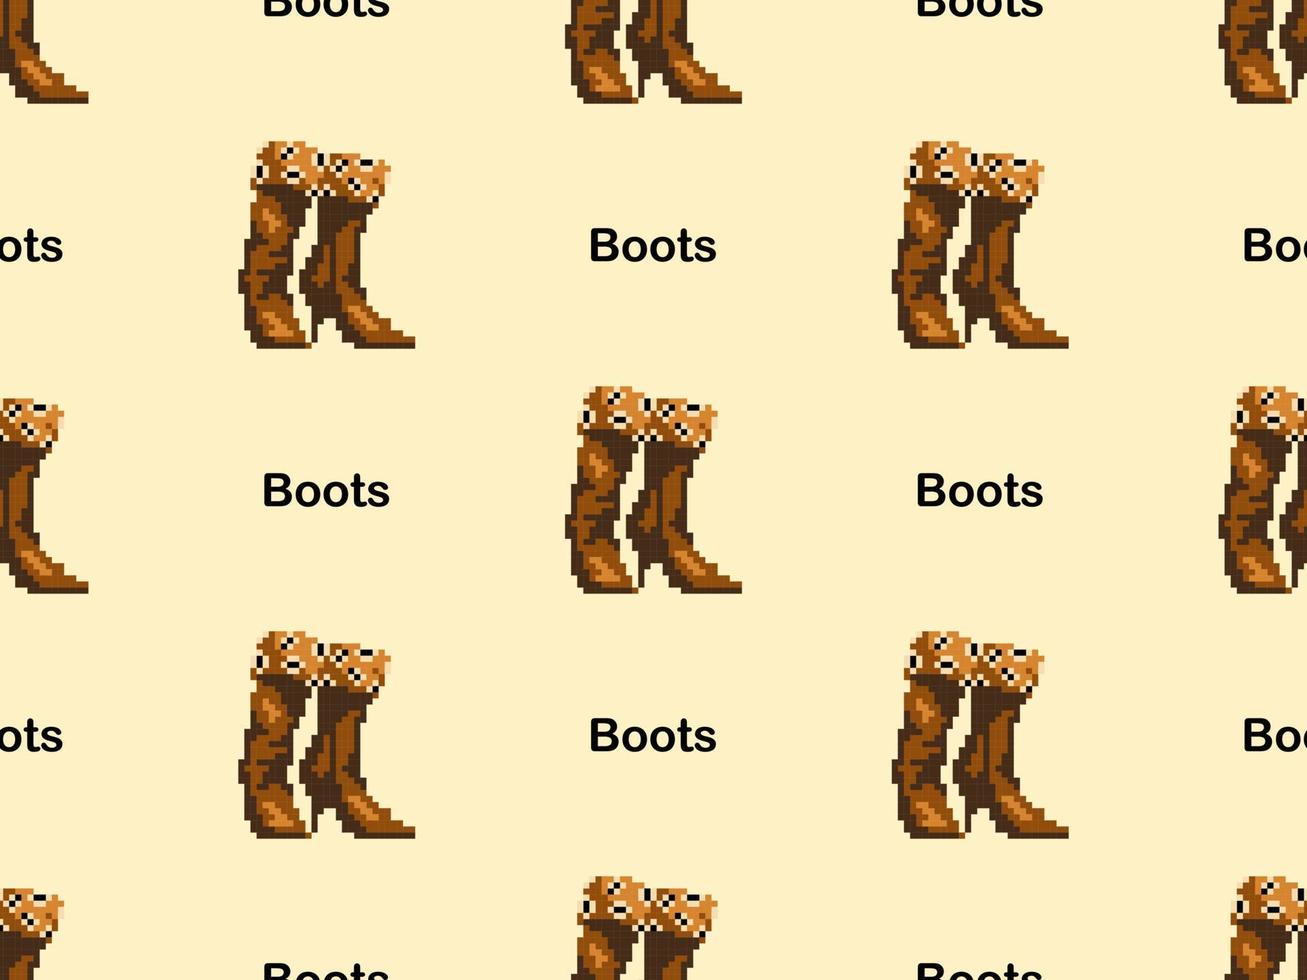 Boots cartoon character seamless pattern on yellow background. Pixel style vector